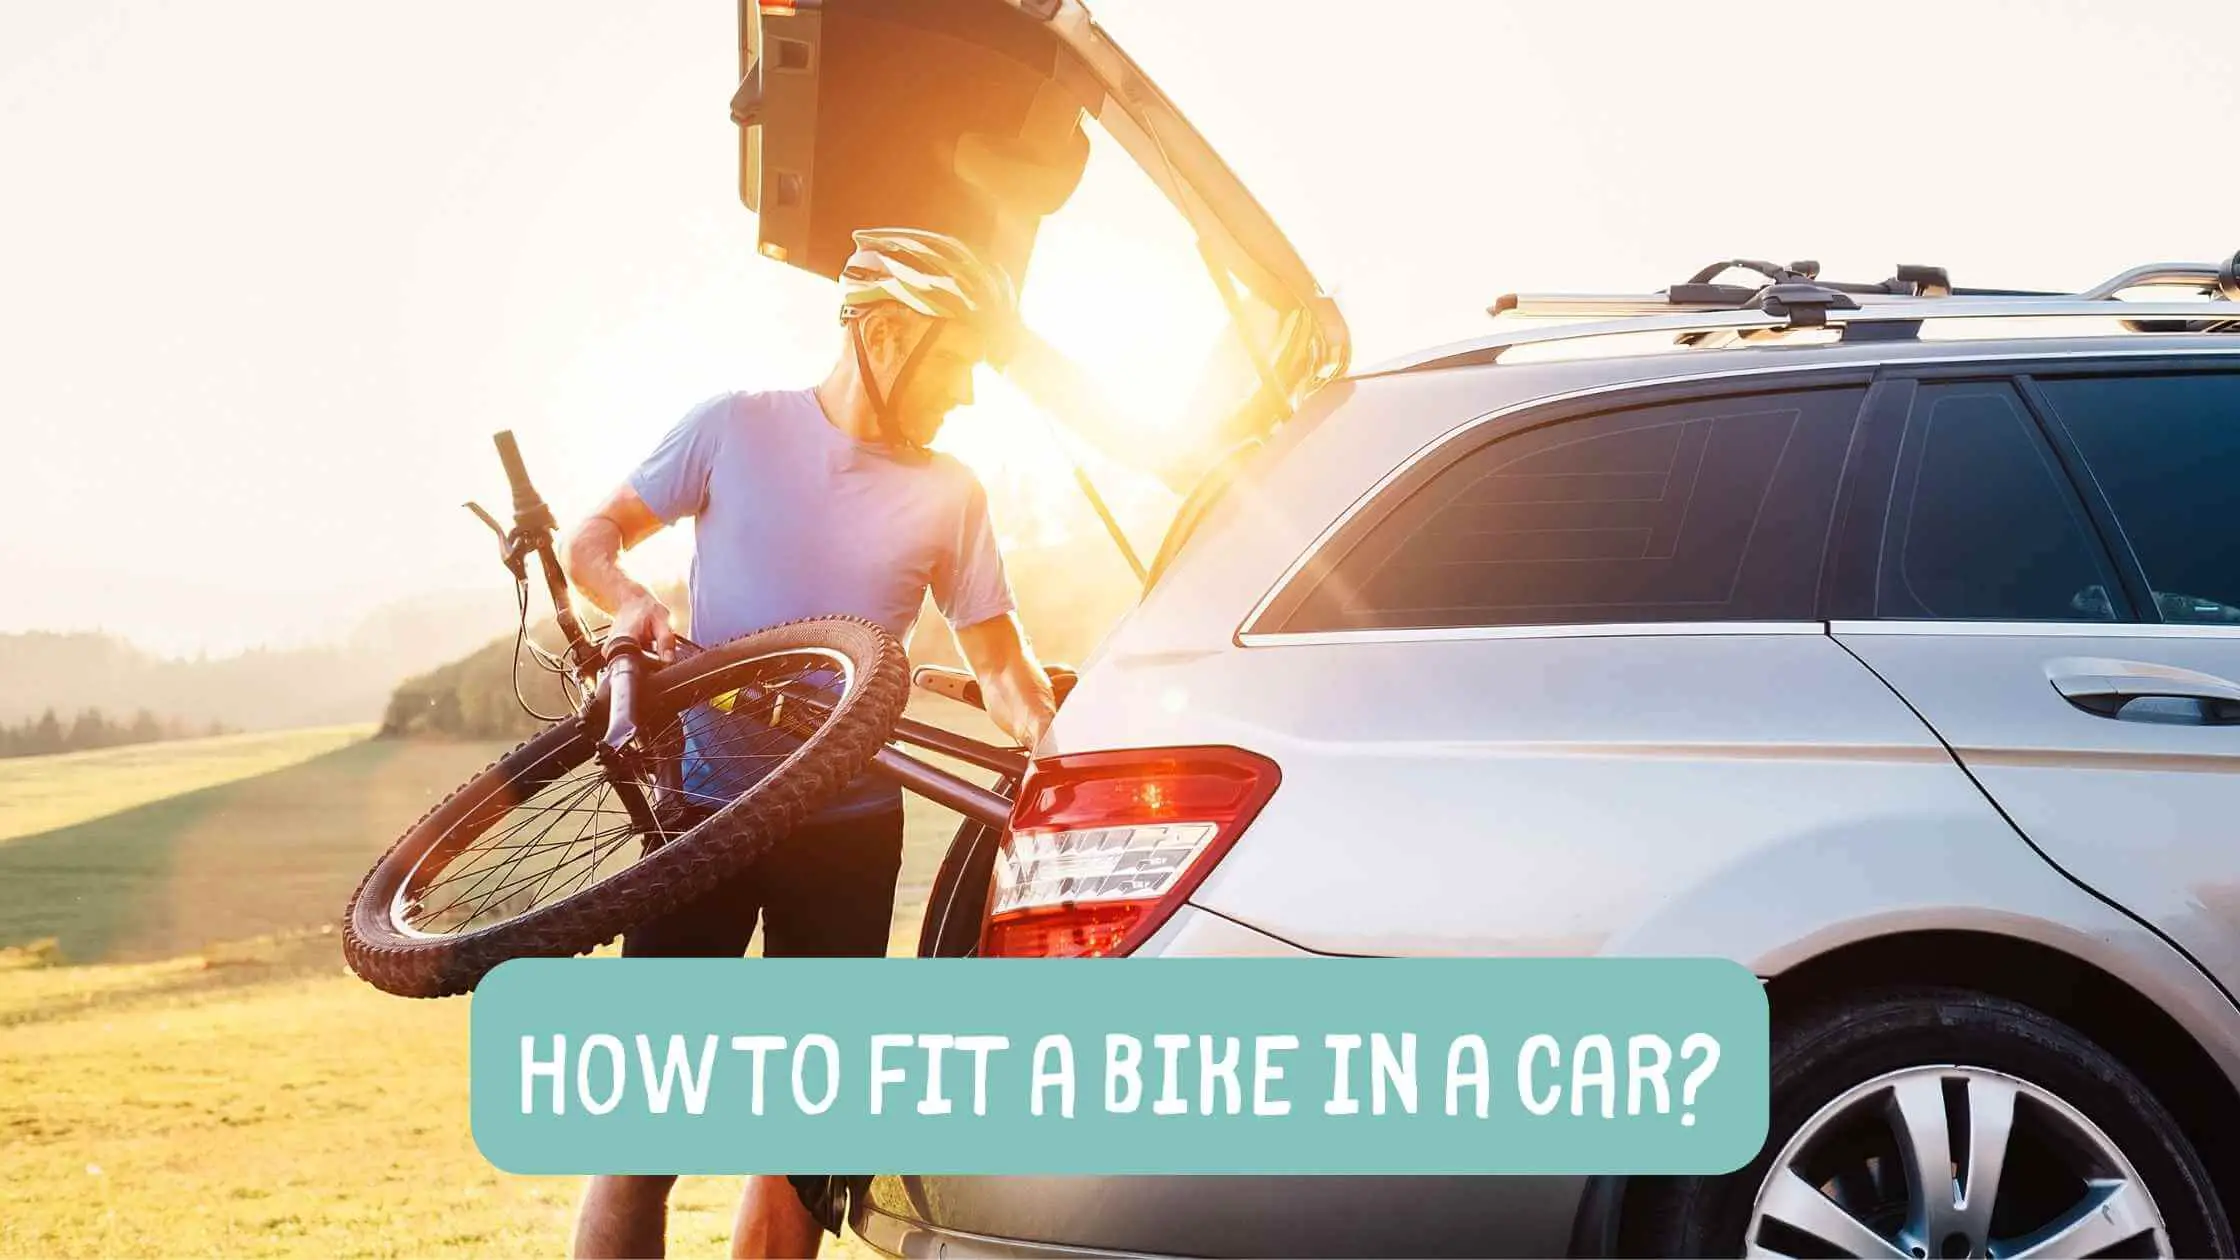 How to fit a bike in a car.